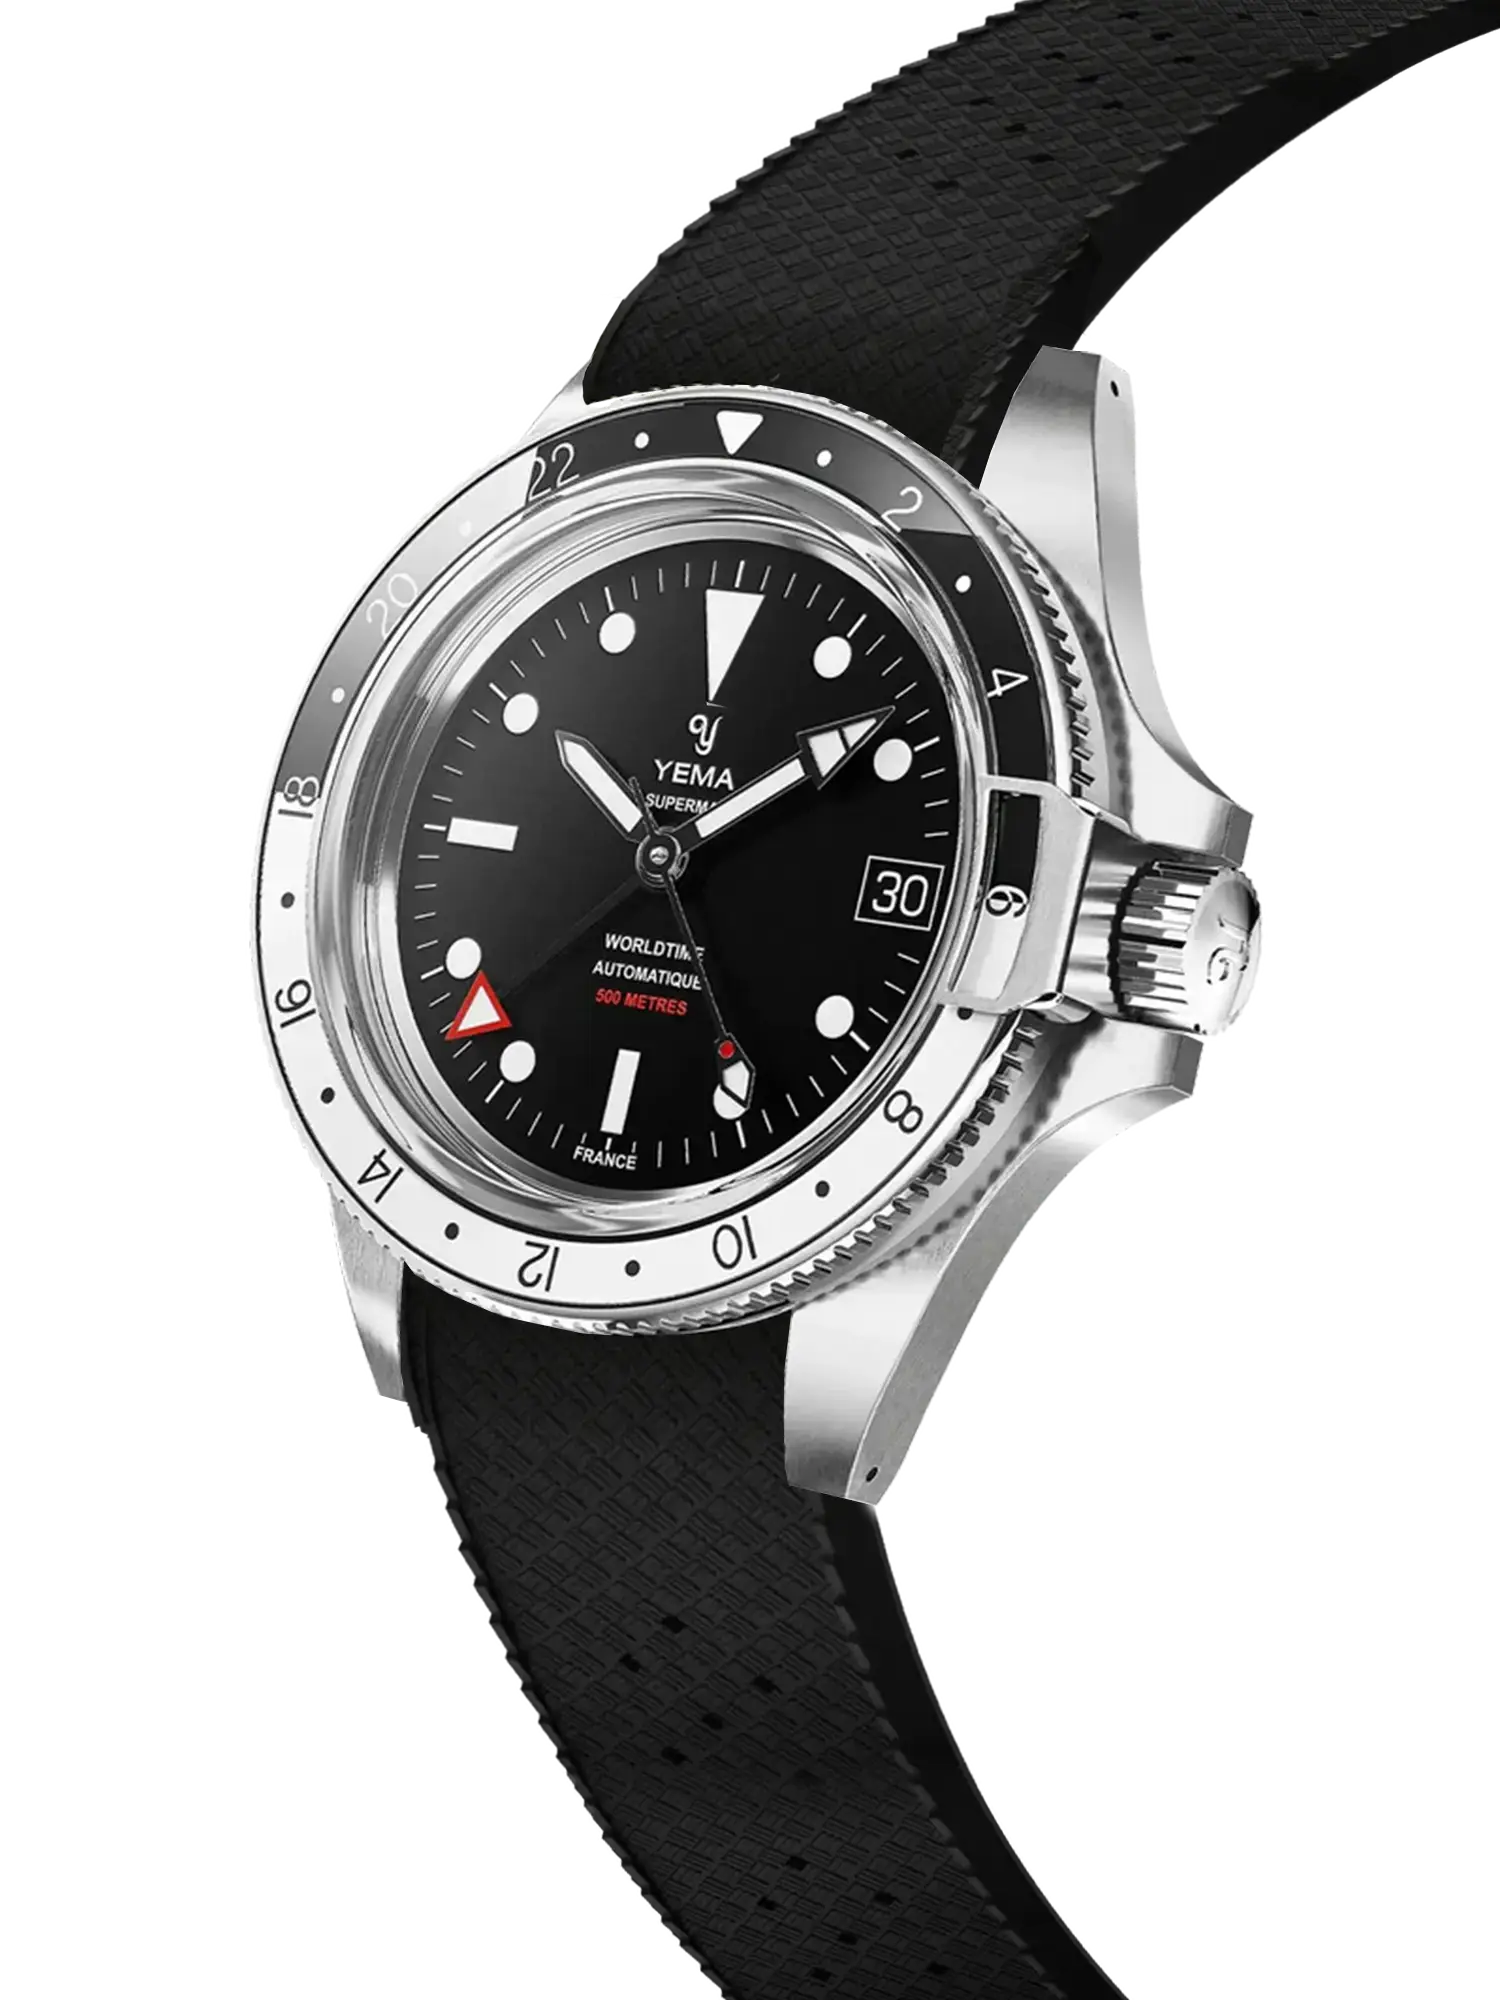 Vintage Diver Watches | YEMA® | Iconic French Diver Watches